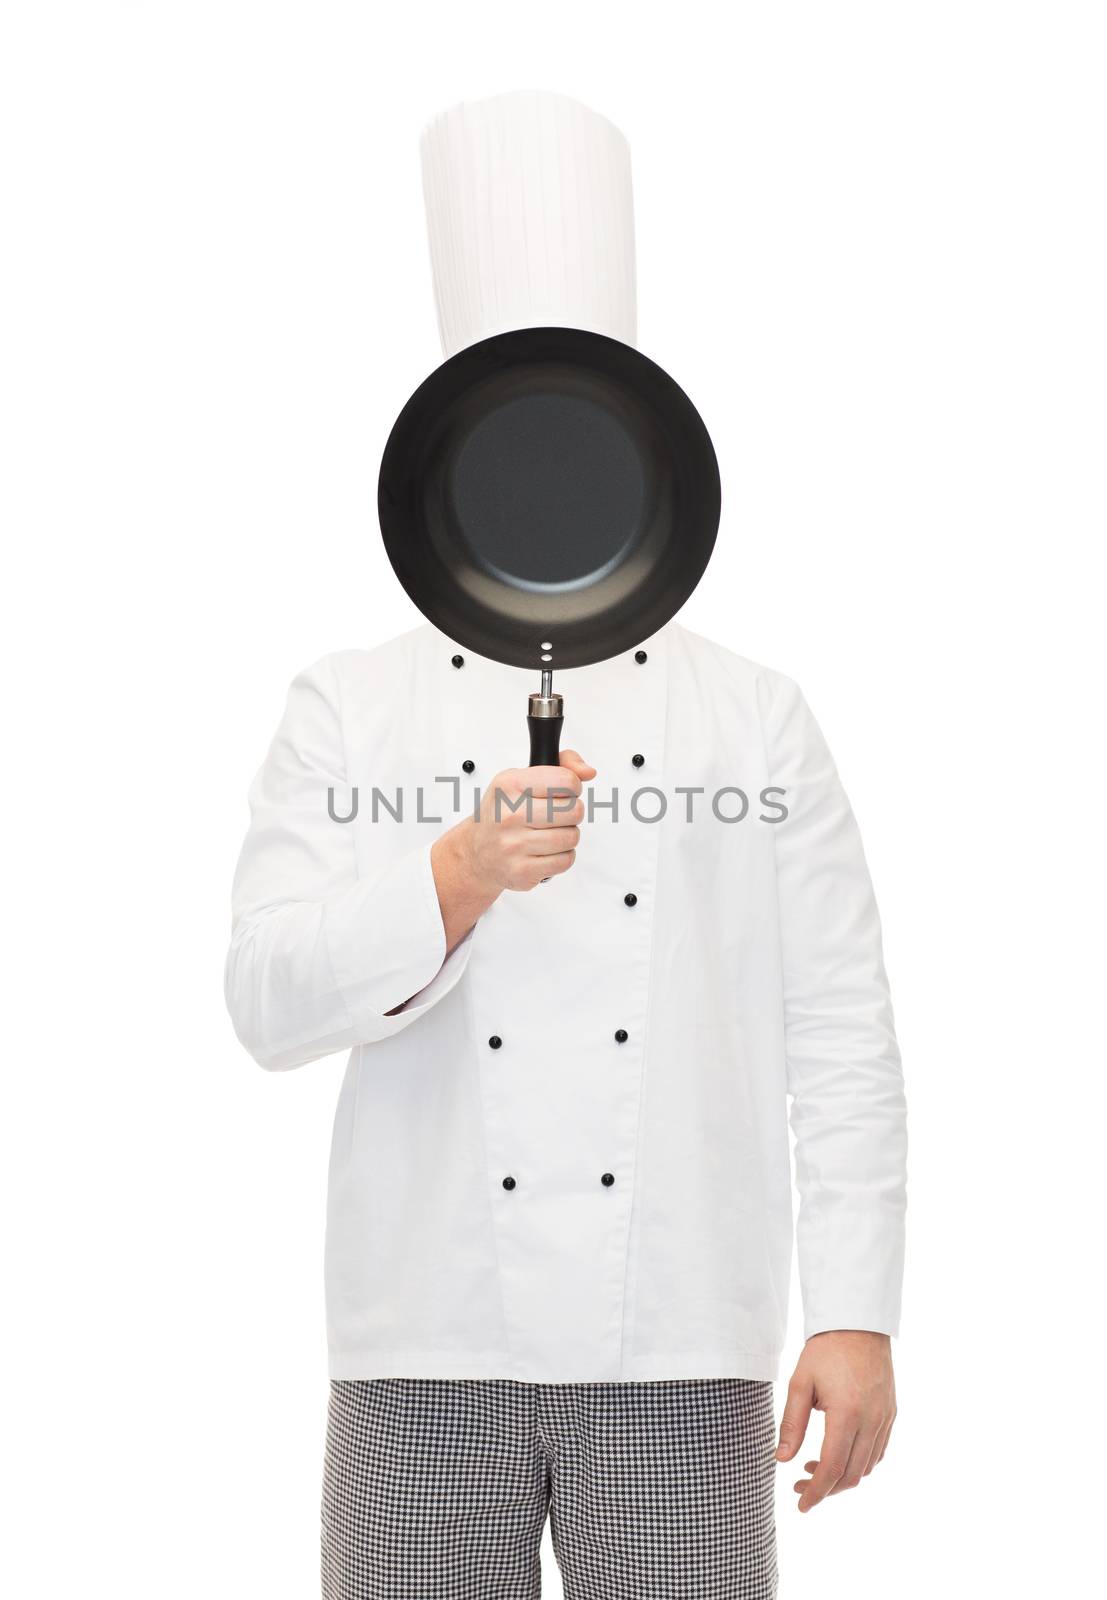 cooking, profession and people concept - male chef cook covering face or hiding behind frying pan